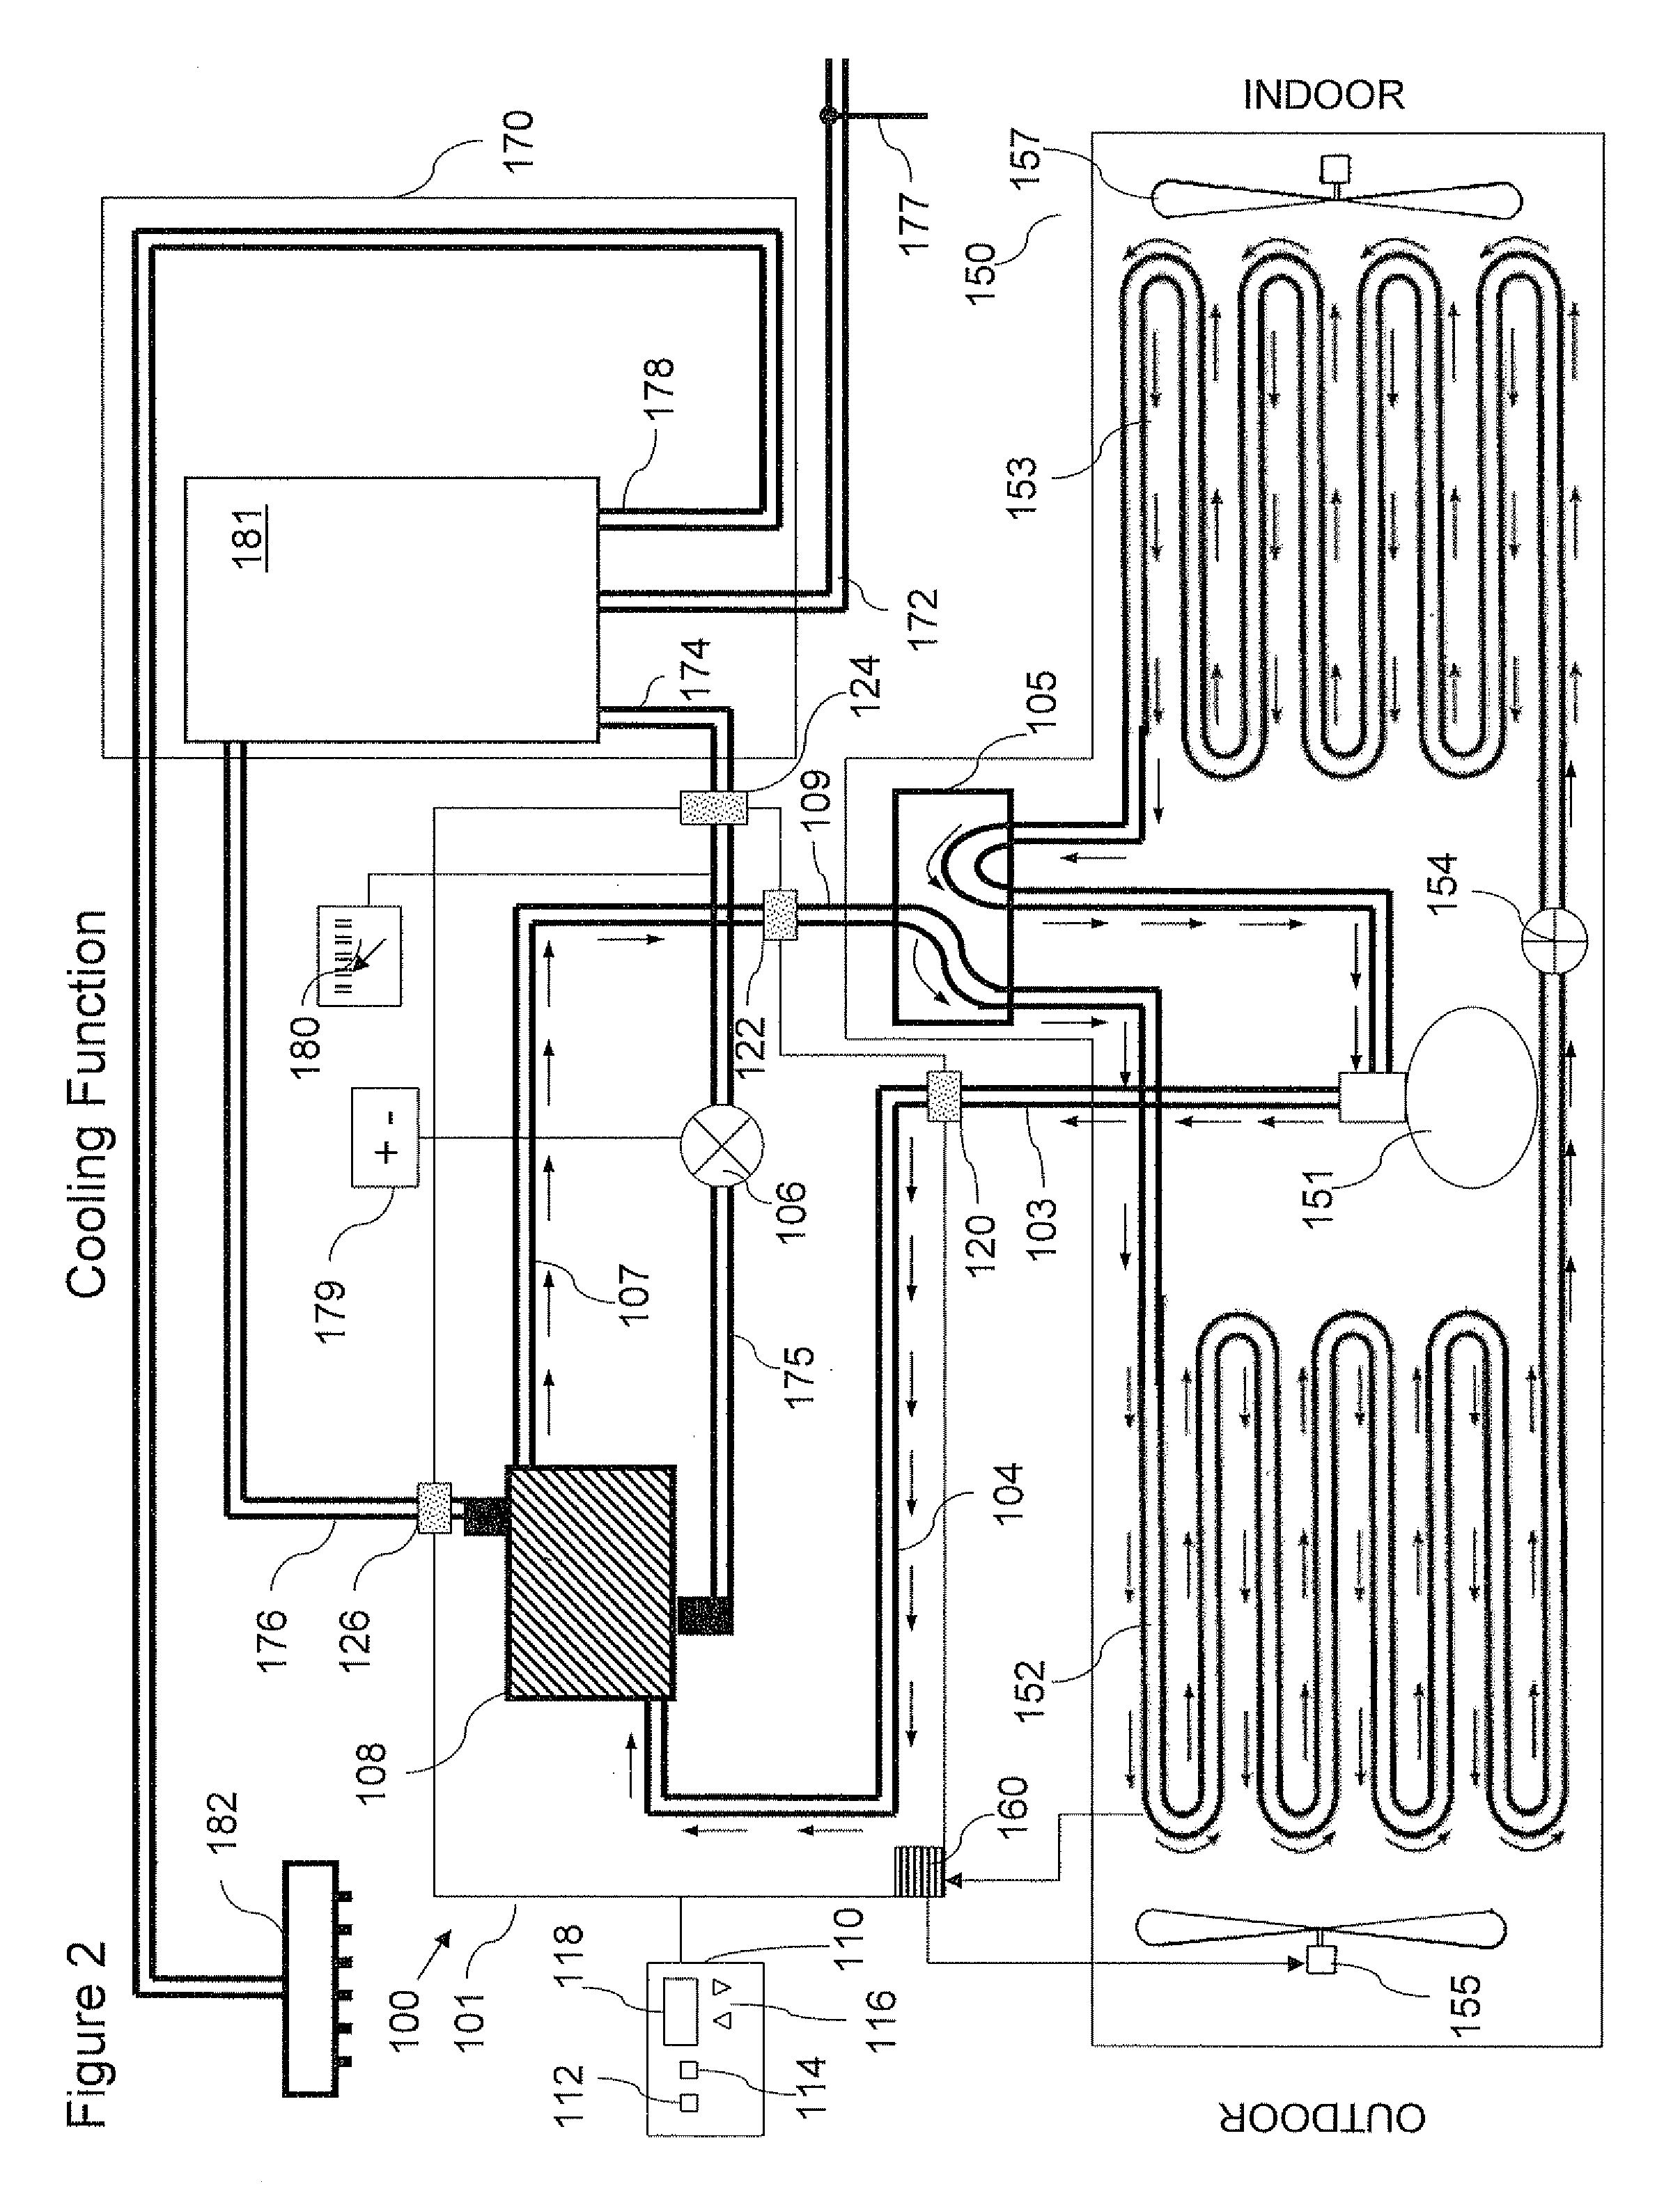 Apparatus for using cast-off heat to warm water from household water heater